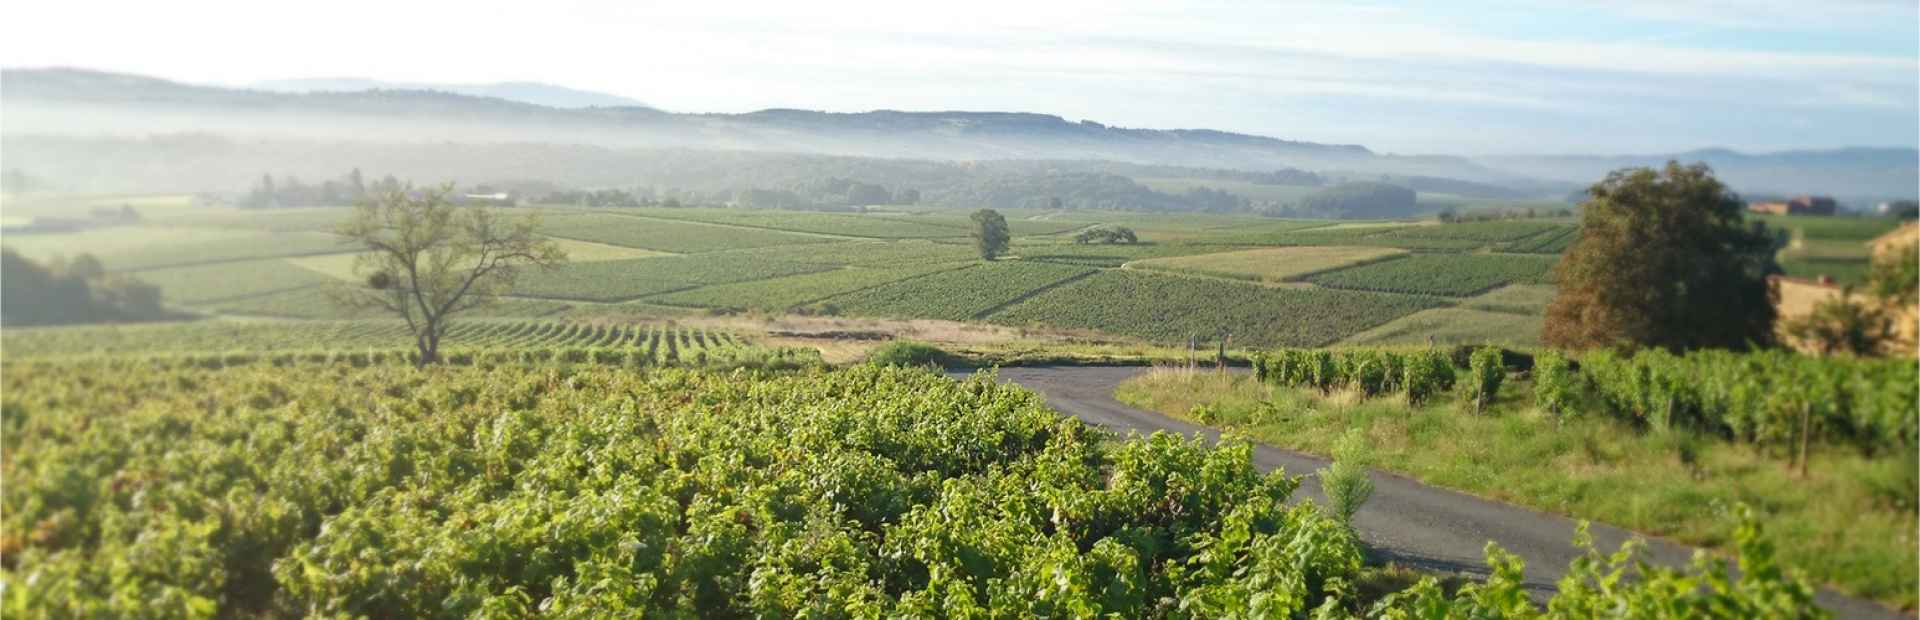 Winesof the appellation Chiroubles